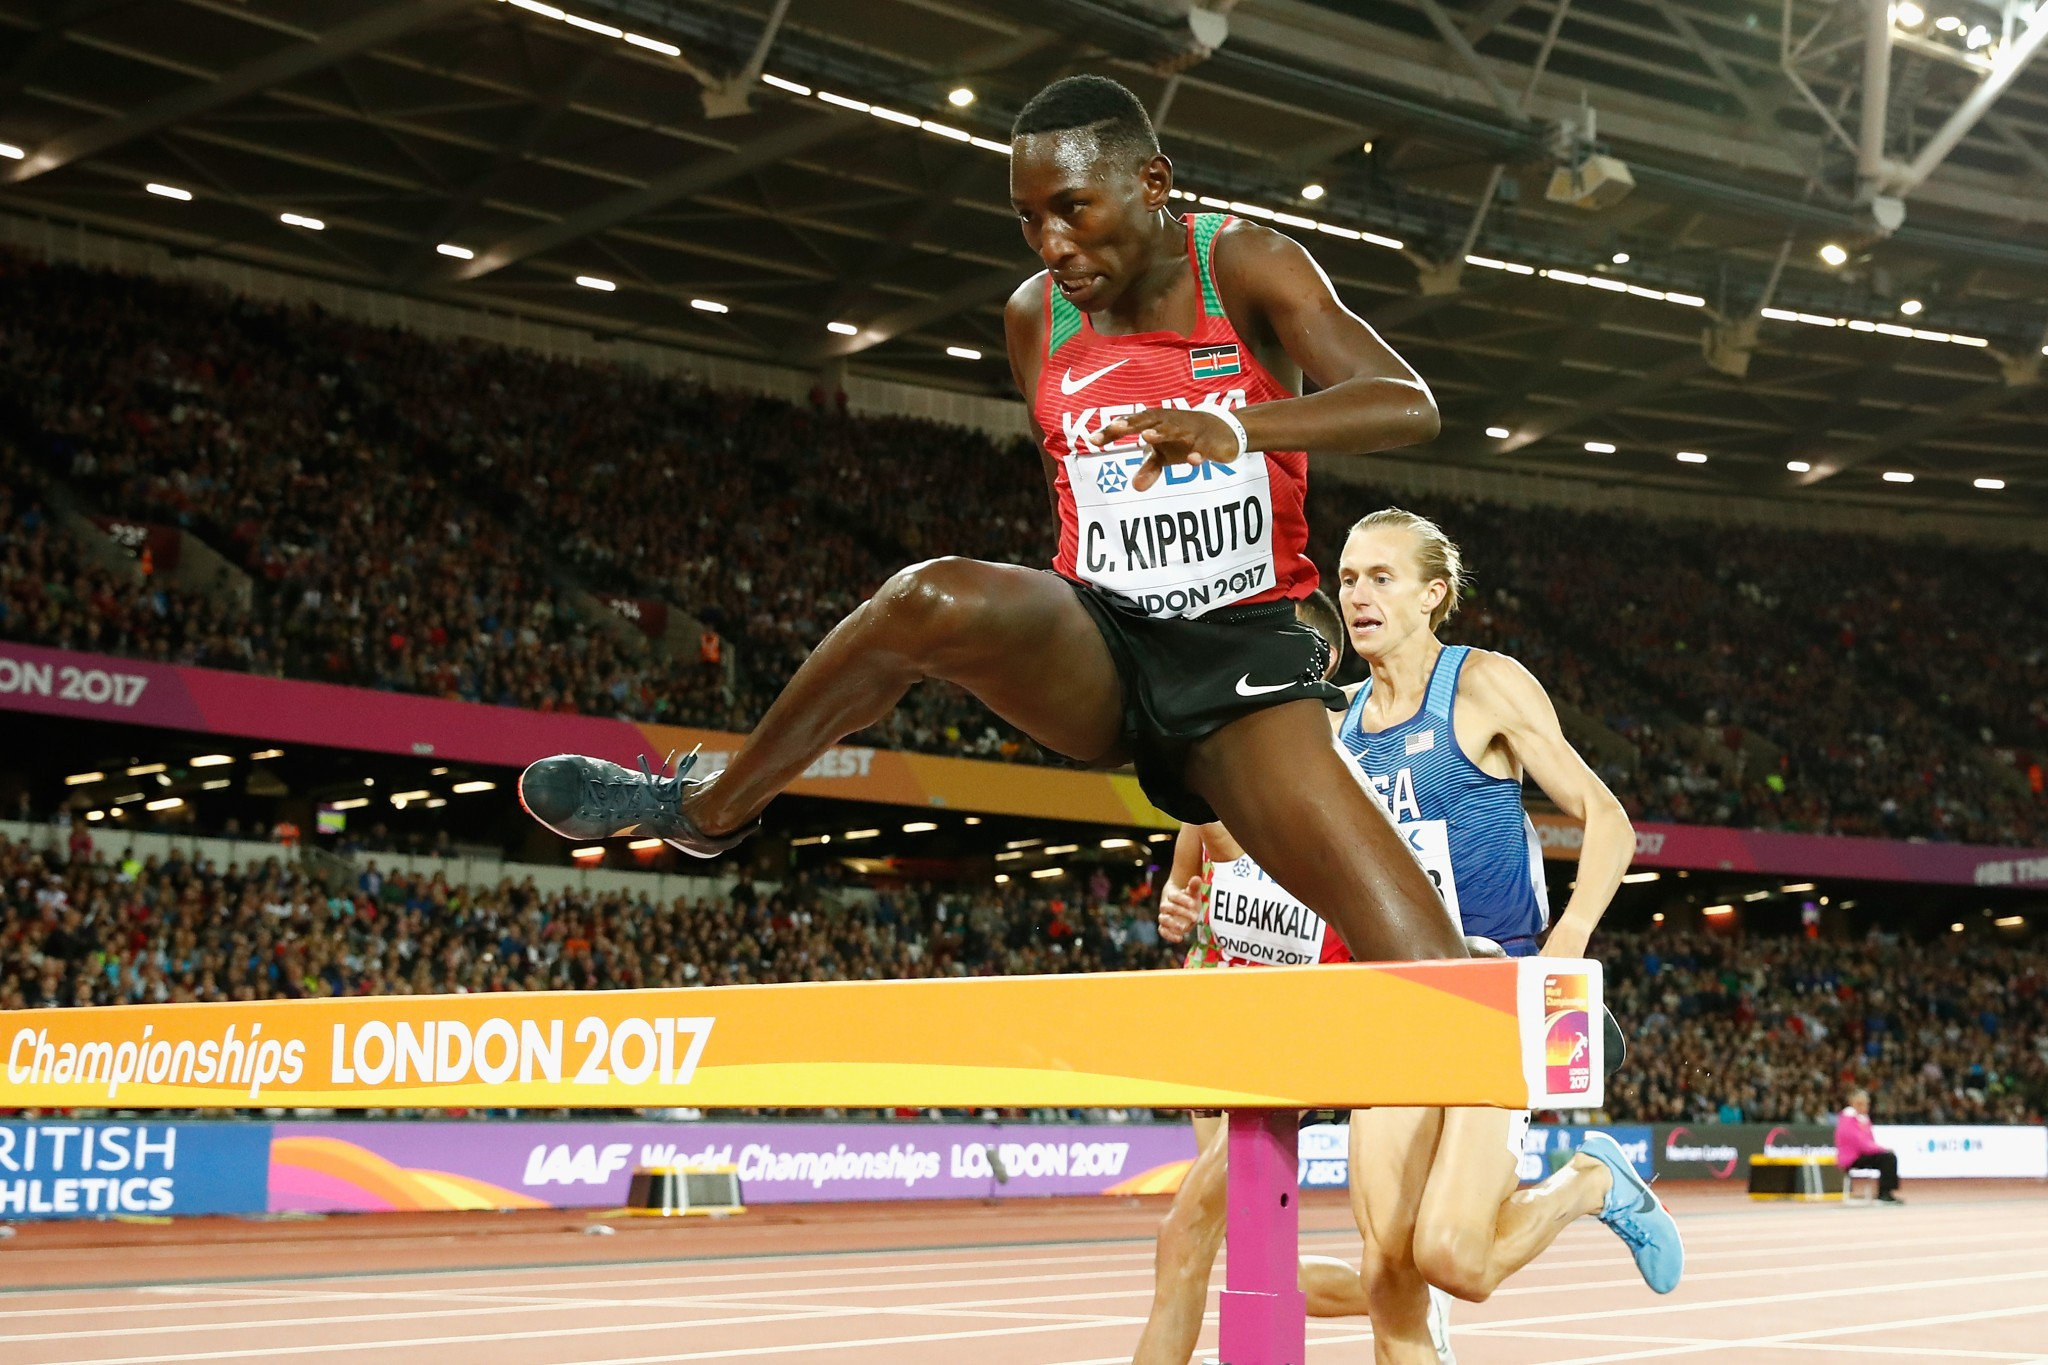 Kenya's Conseslus Kipruto added the world 3,000m steeplechase crown to his Olympic title ©Getty Images